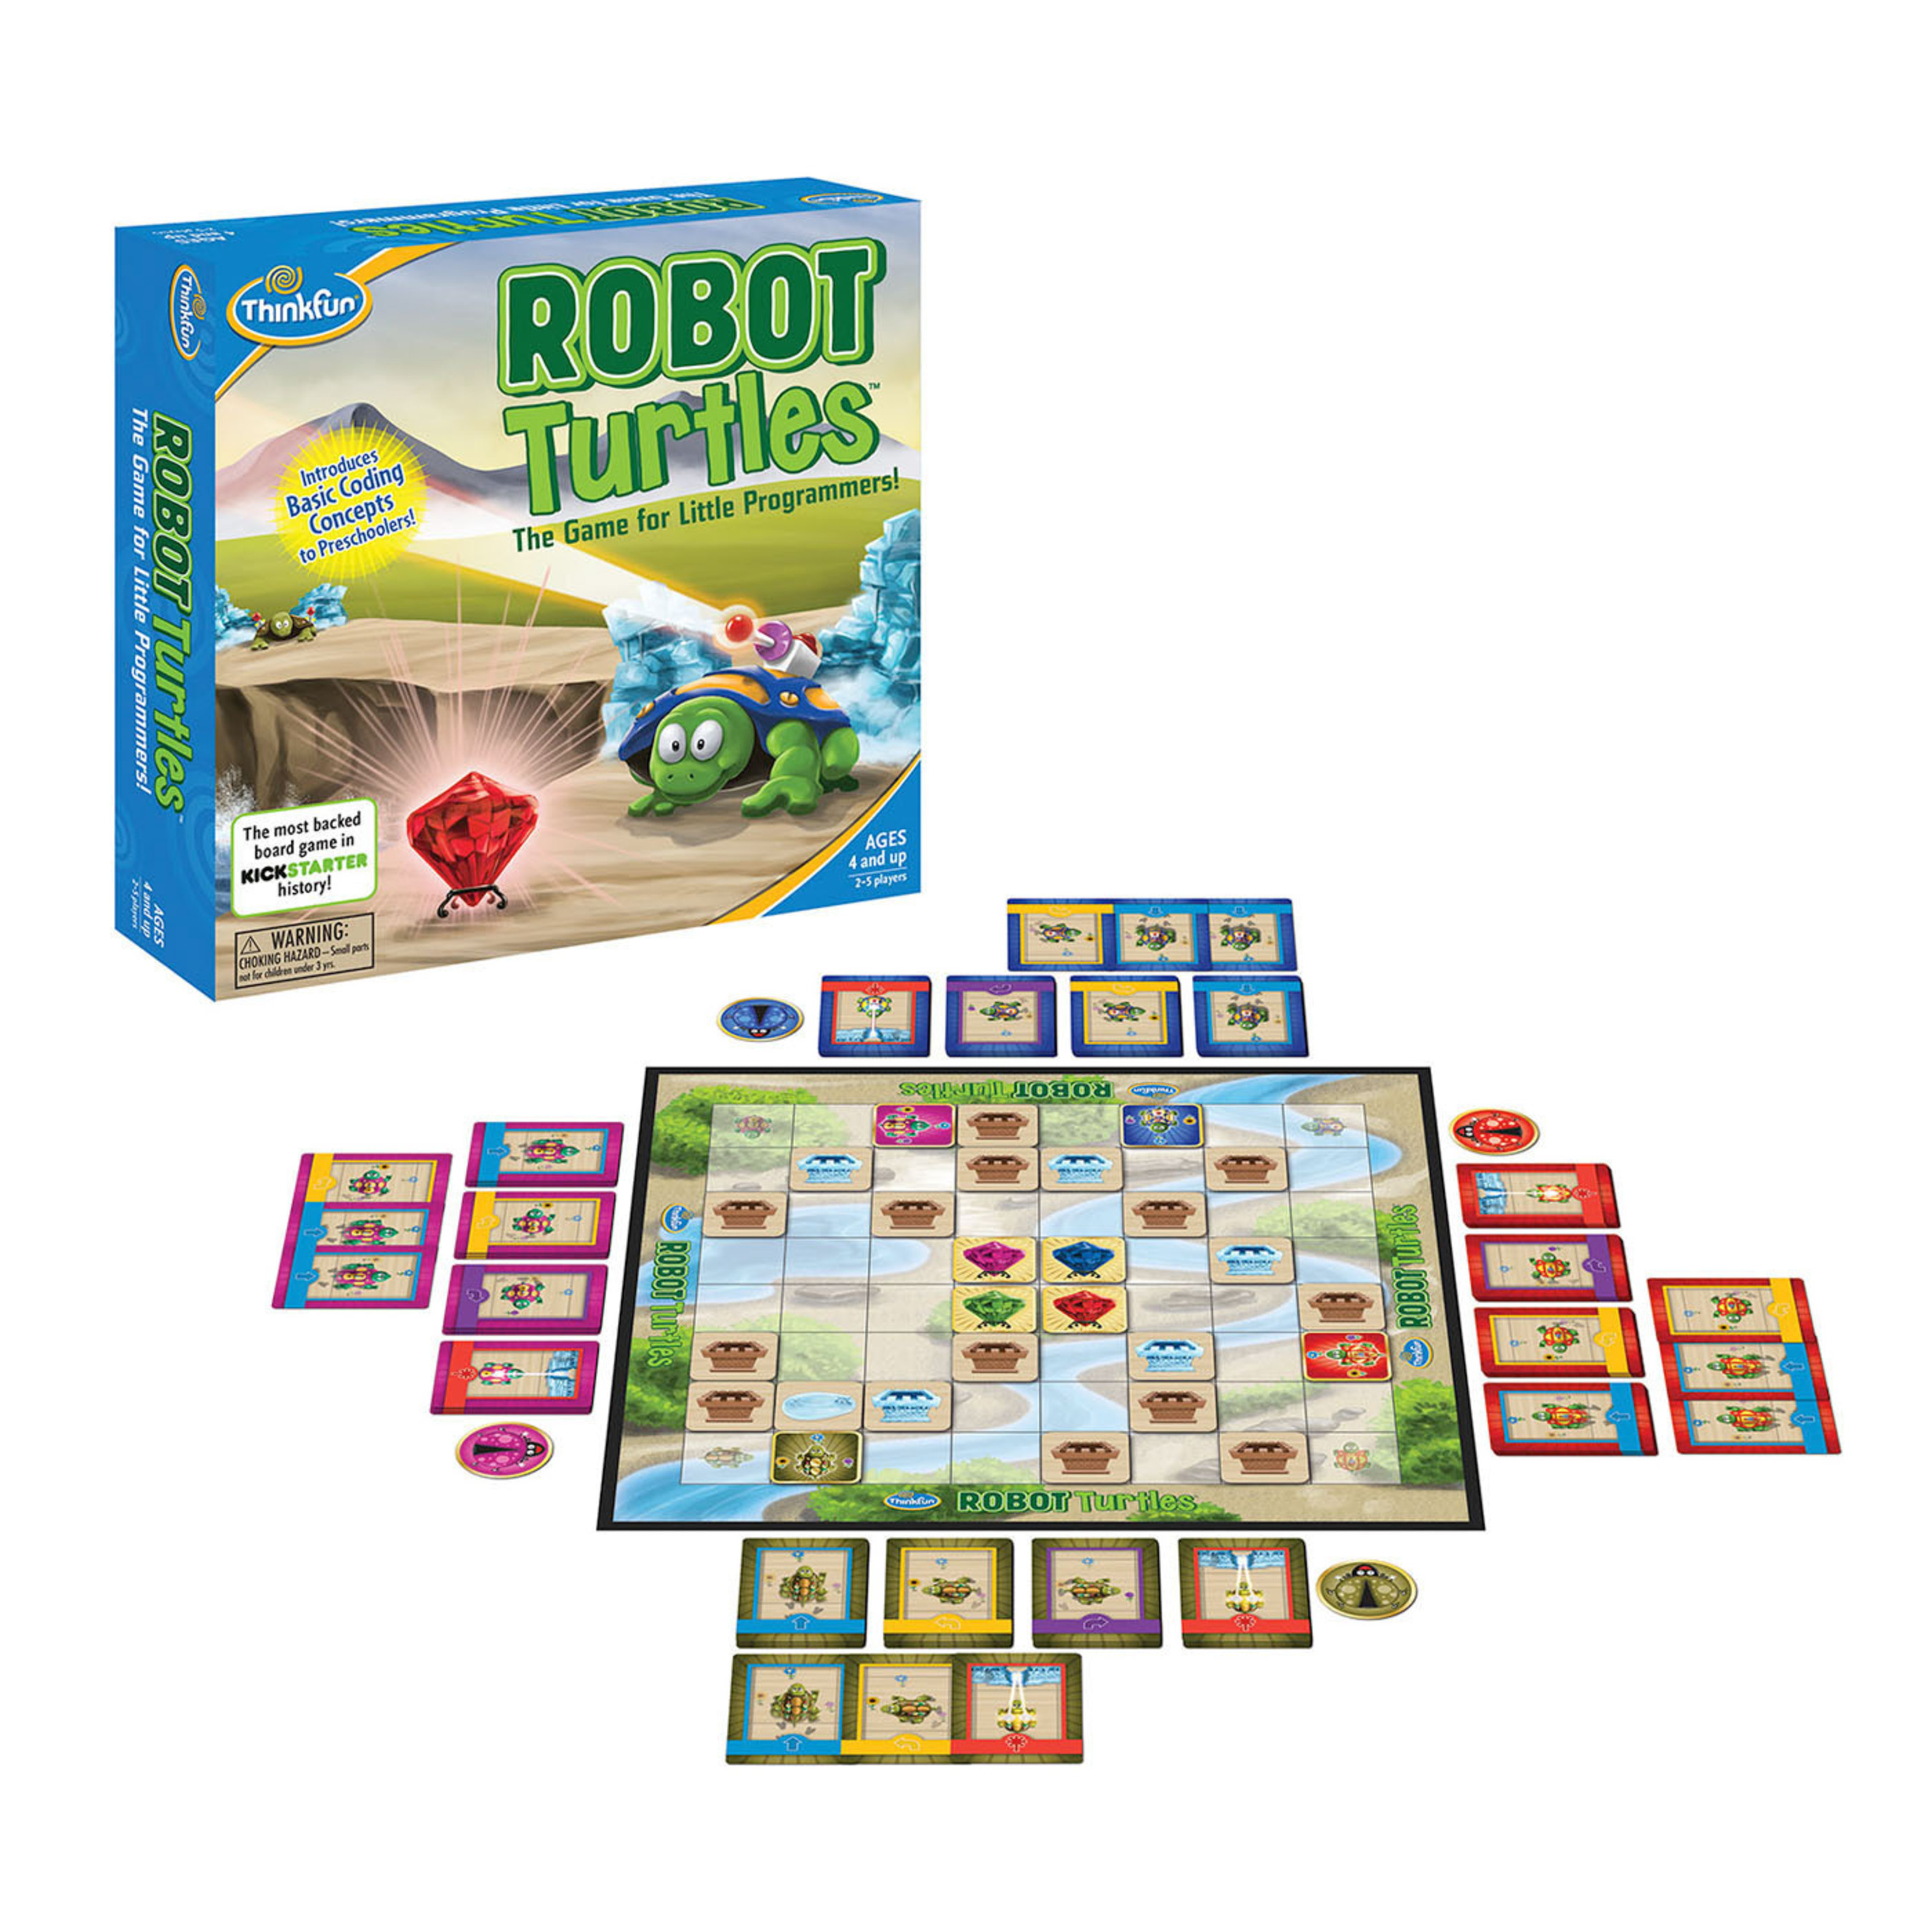 ThinkFun(R) will bring Kickstarter sensation Robot Turtles(TM), the board game for little programmers, to the market in concert with national movements supporting code literacy and STEM education. Visit ThinkFun.com/robotturtles to pre-order Robot Turtles and receive a free Special Edition Expansion Pack that doubles game play. ThinkFun is the world's leading developer of addictively fun games that sharpen your mind and best known for Laser Maze(TM), Rush Hour(R) and Zingo!(R). (PRNewsFoto/ThinkFun, Inc.) (PRNewsFoto/THINKFUN, INC.)